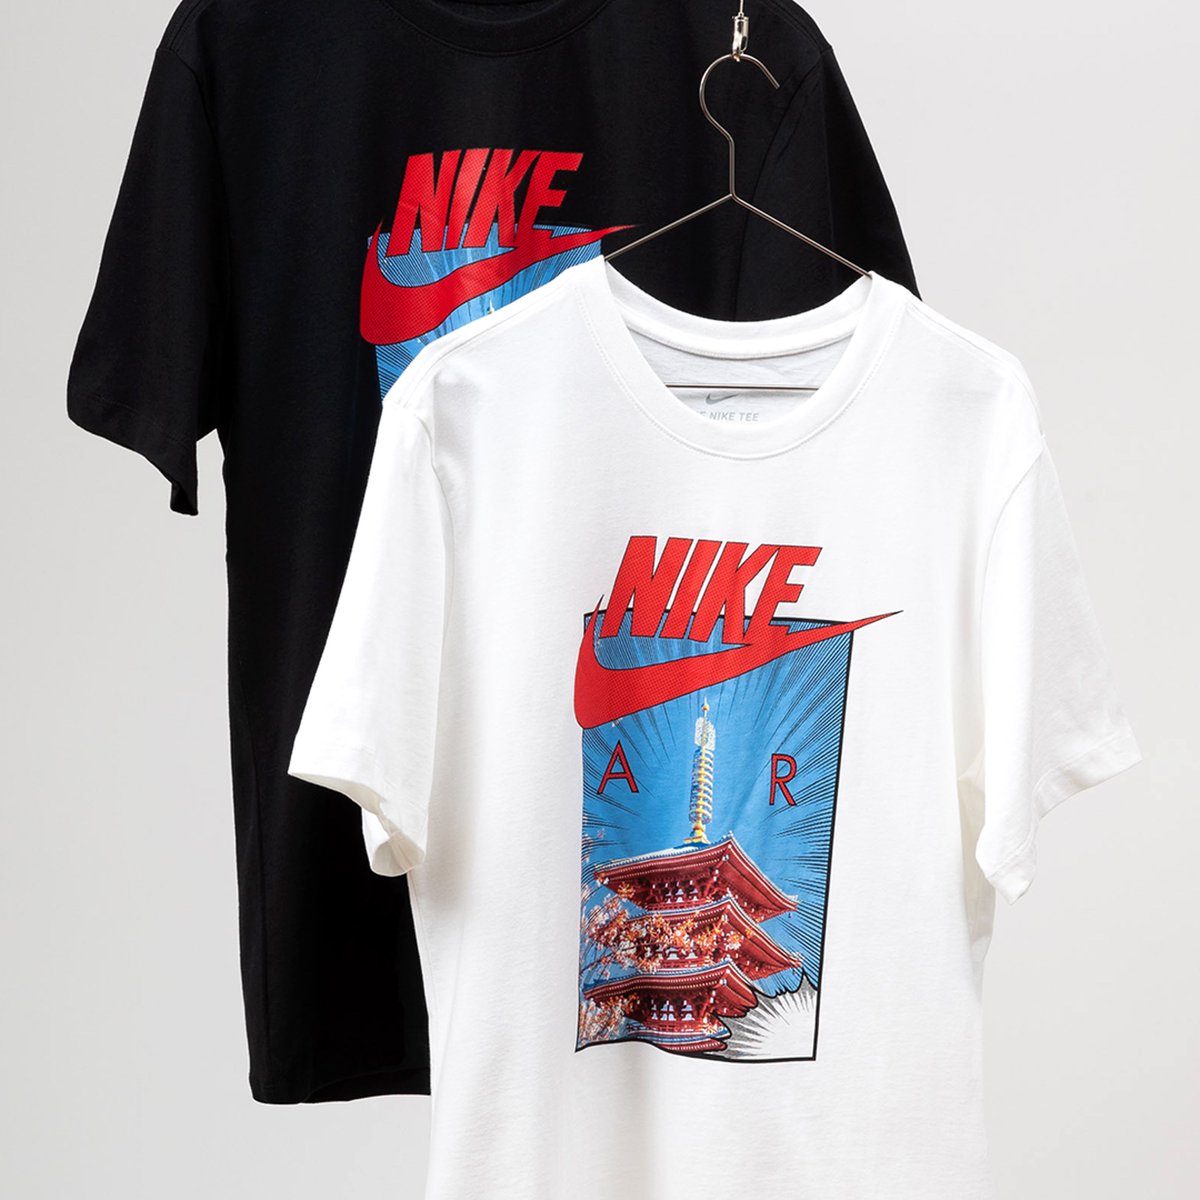 cerca menor Mago Titolo Twitterissä: "#outNOW 🔴 new graphic tees by Nike available online  ⚫️ available for purchase ➡️ https://t.co/hwQ6GDLmeA 🗼 small to x-large |  style codes 🔎 CT6530-100 and CT6530-010 #nike #tokyo #nikesportswear #tee #